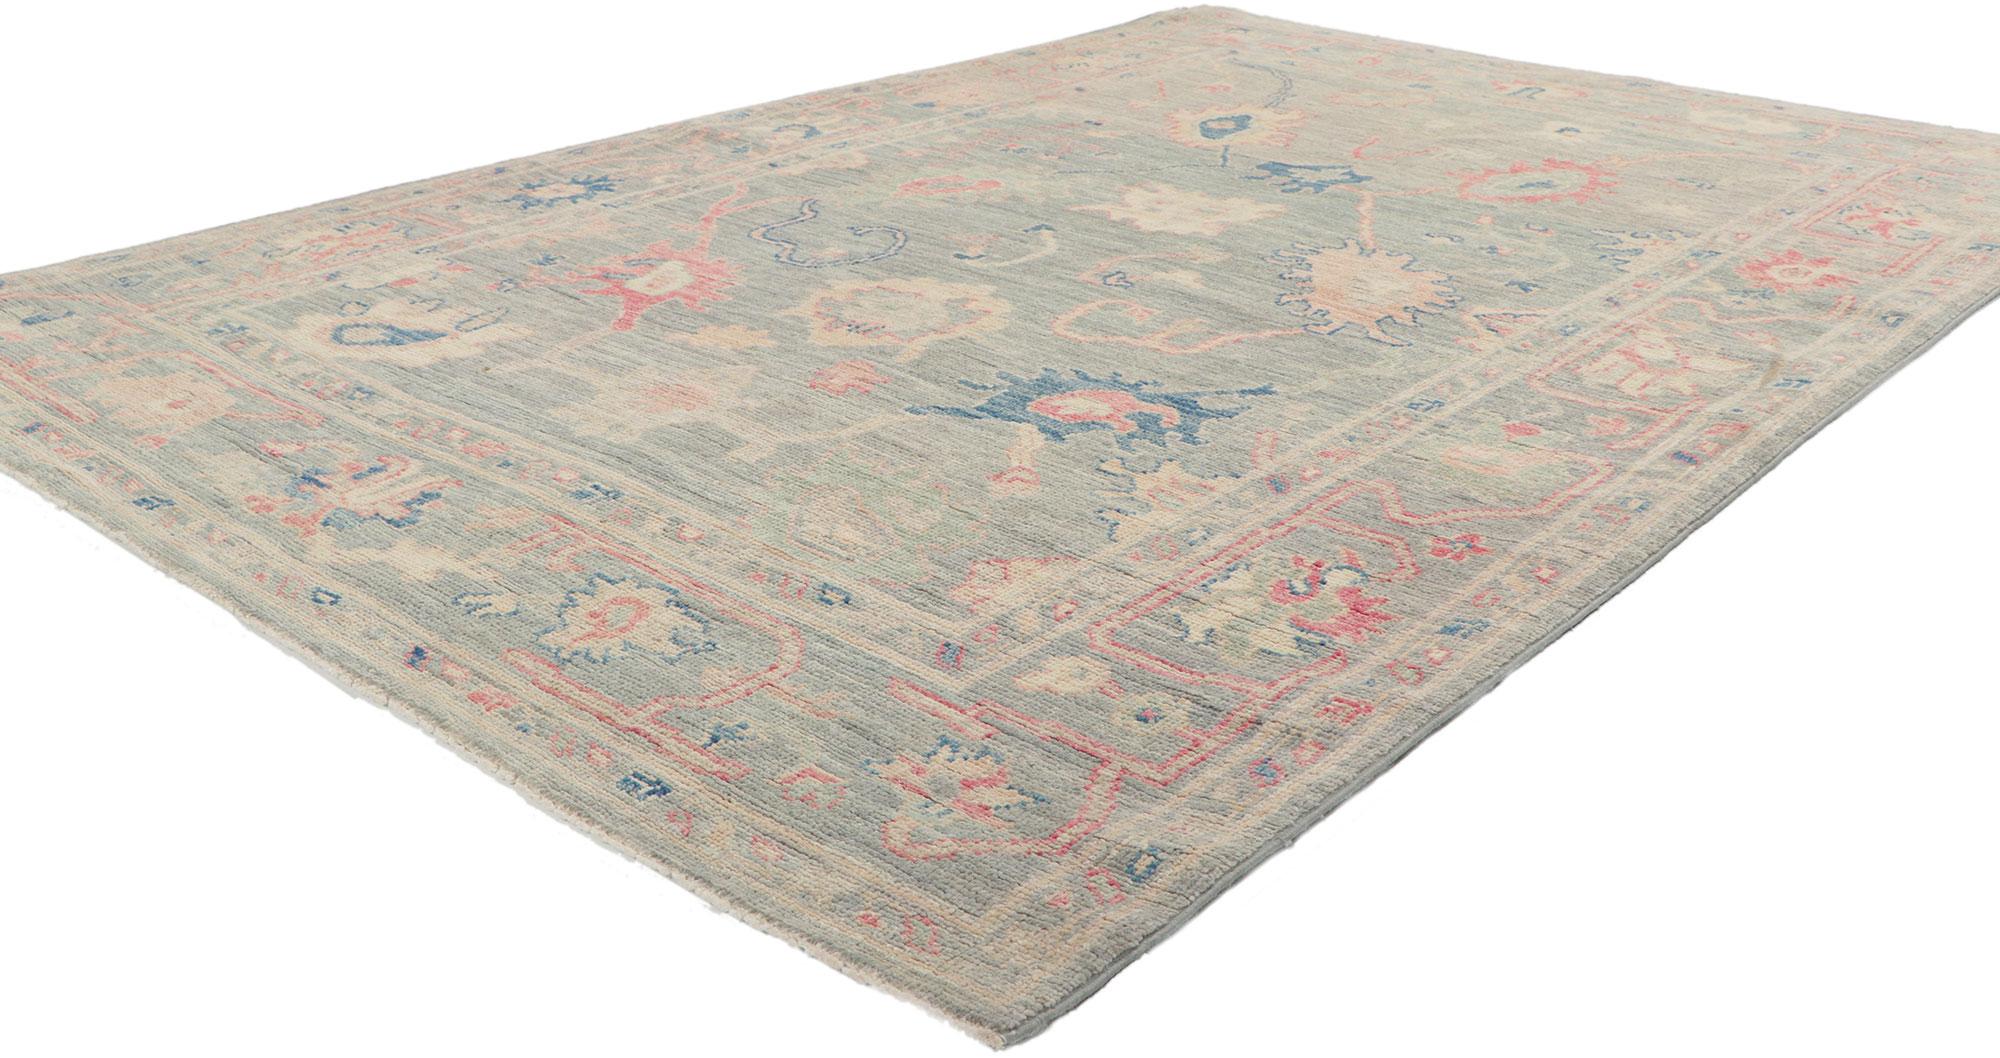 80886 New Modern Style Oushak rug with Soft Colors, 04'10 x 07'02. Polished and playful, this hand-knotted wool contemporary Contemporary Oushak rug beautifully embodies a modern style. The composition features an all-over botanical pattern composed